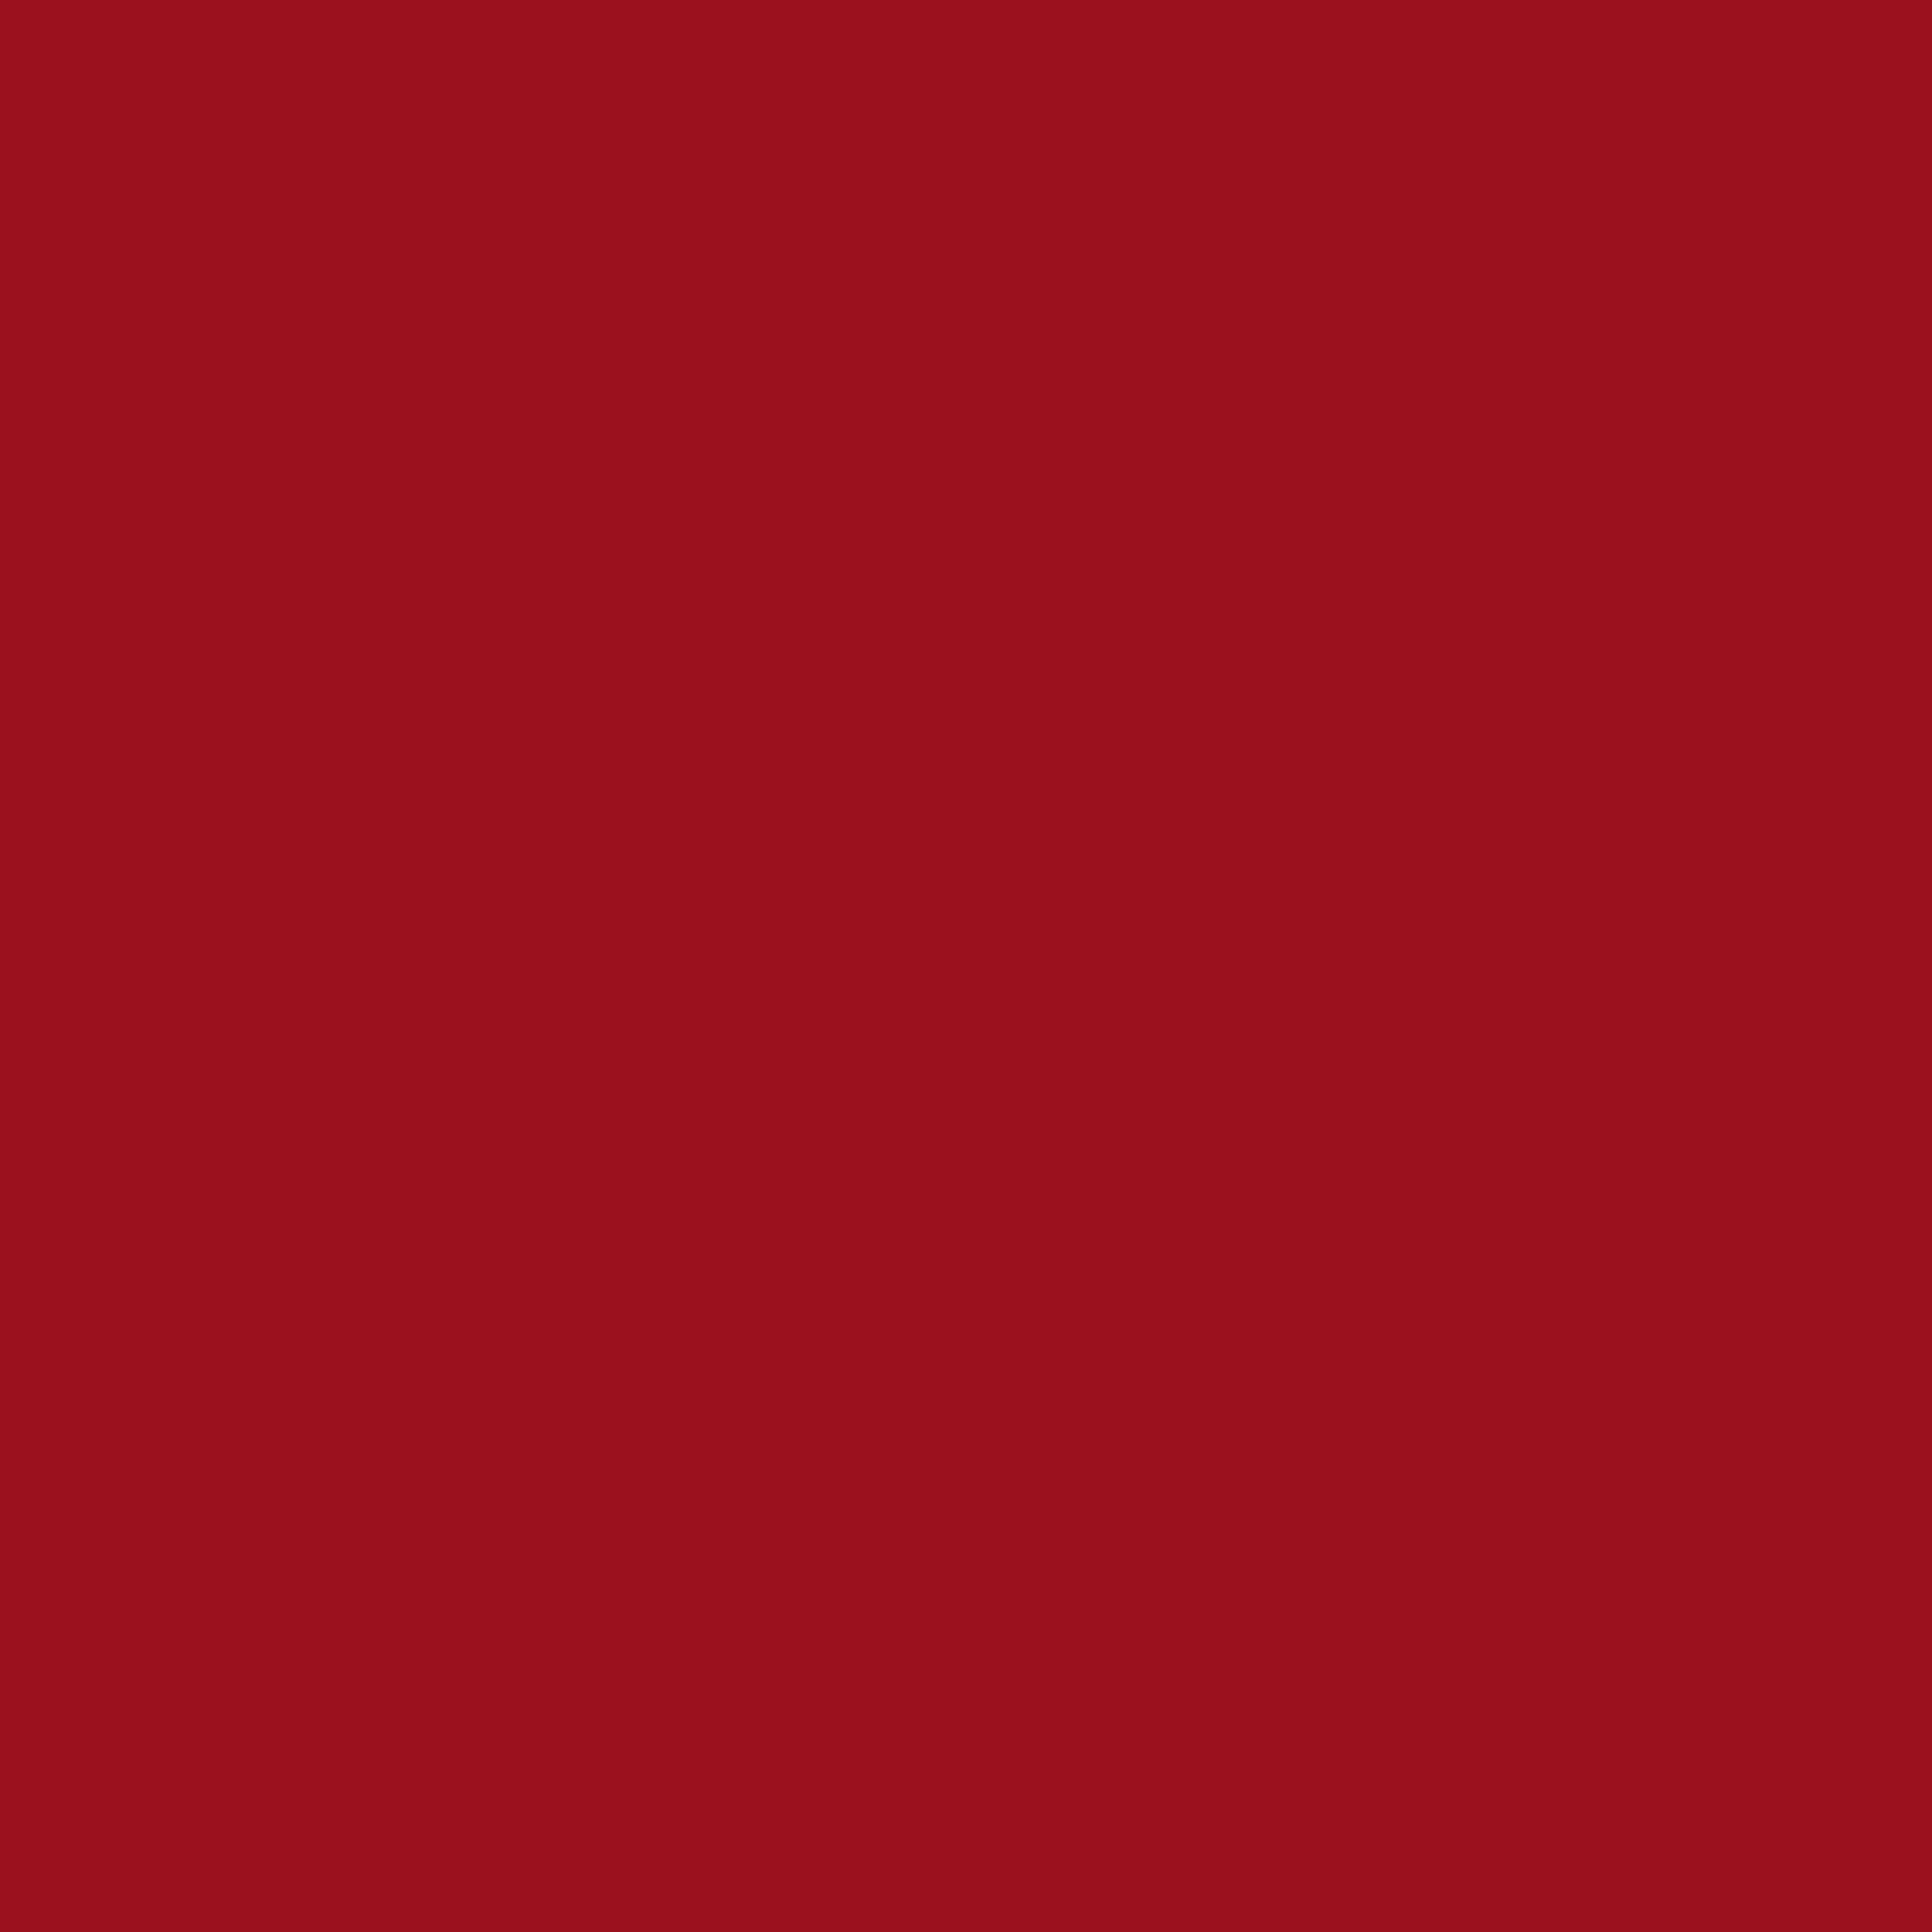 2048x2048 Ruby Red Solid Color Background